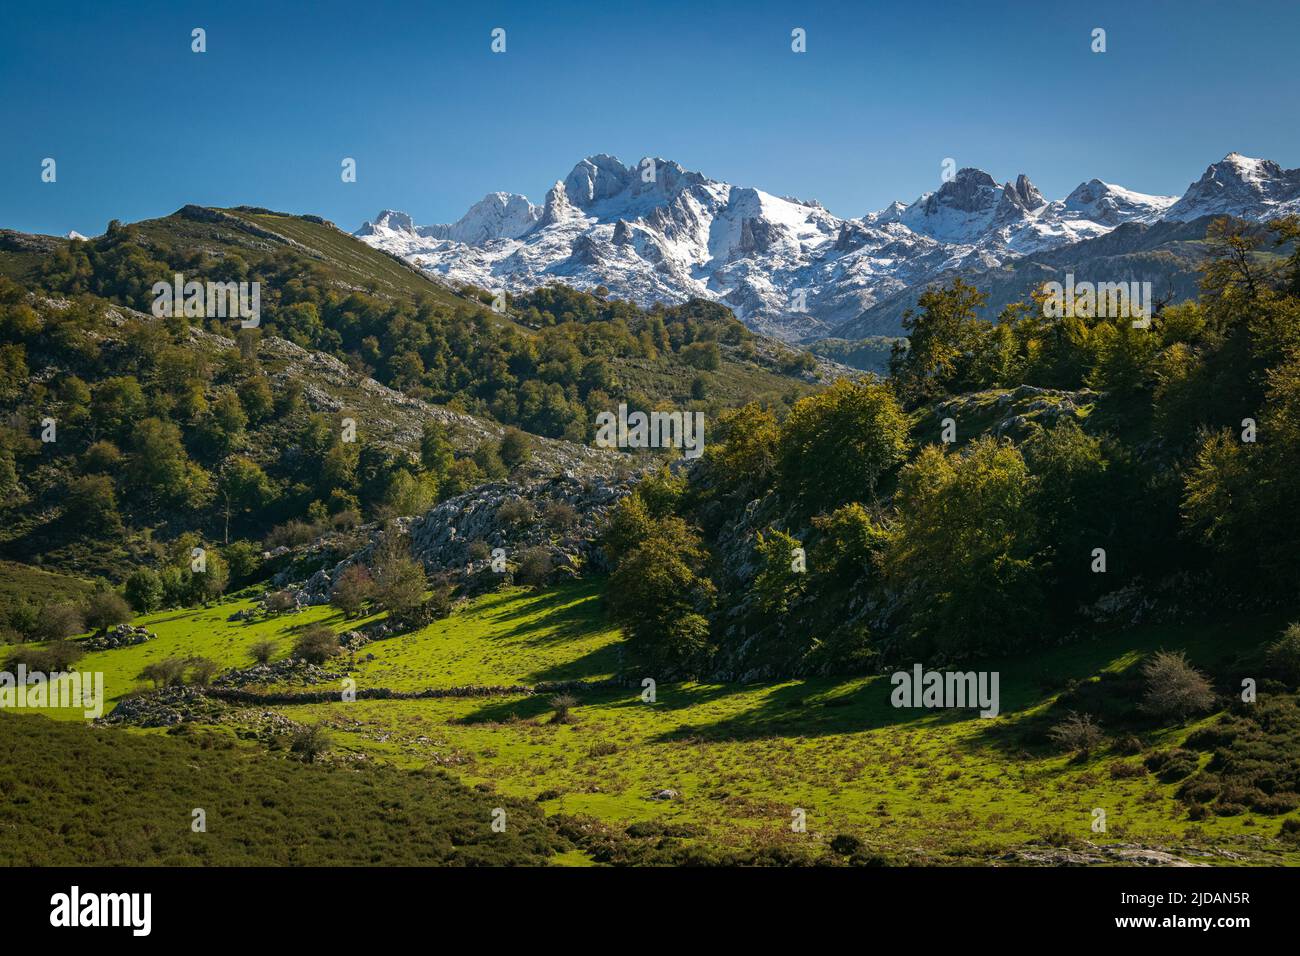 Snow-capped mountains in Covadonga, Asturias, Spain. Stock Photo